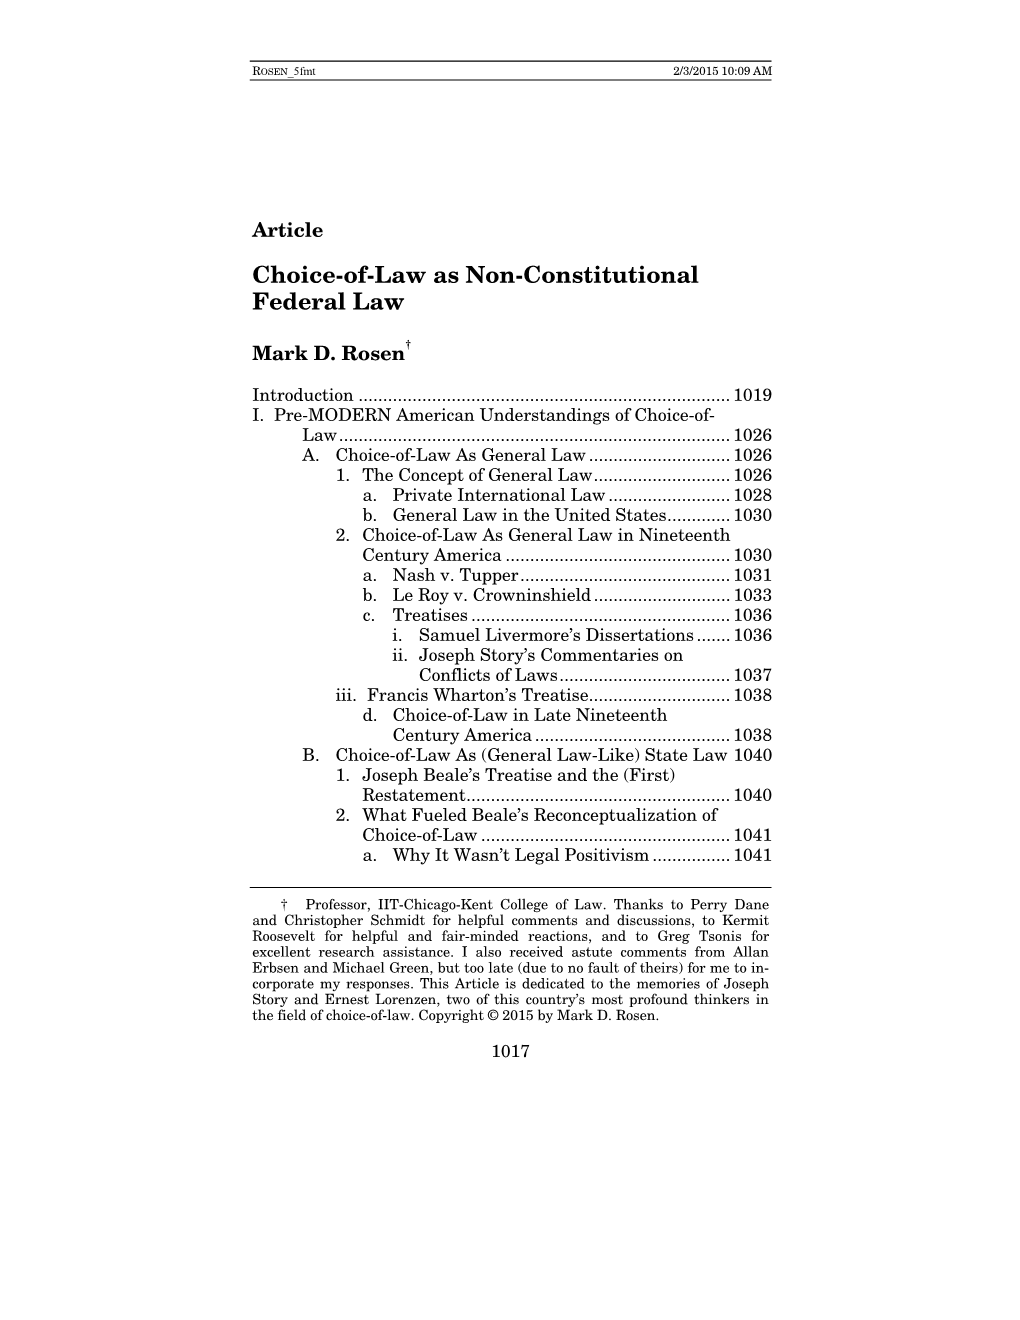 Article Choice-Of-Law As Non-Constitutional Federal Law